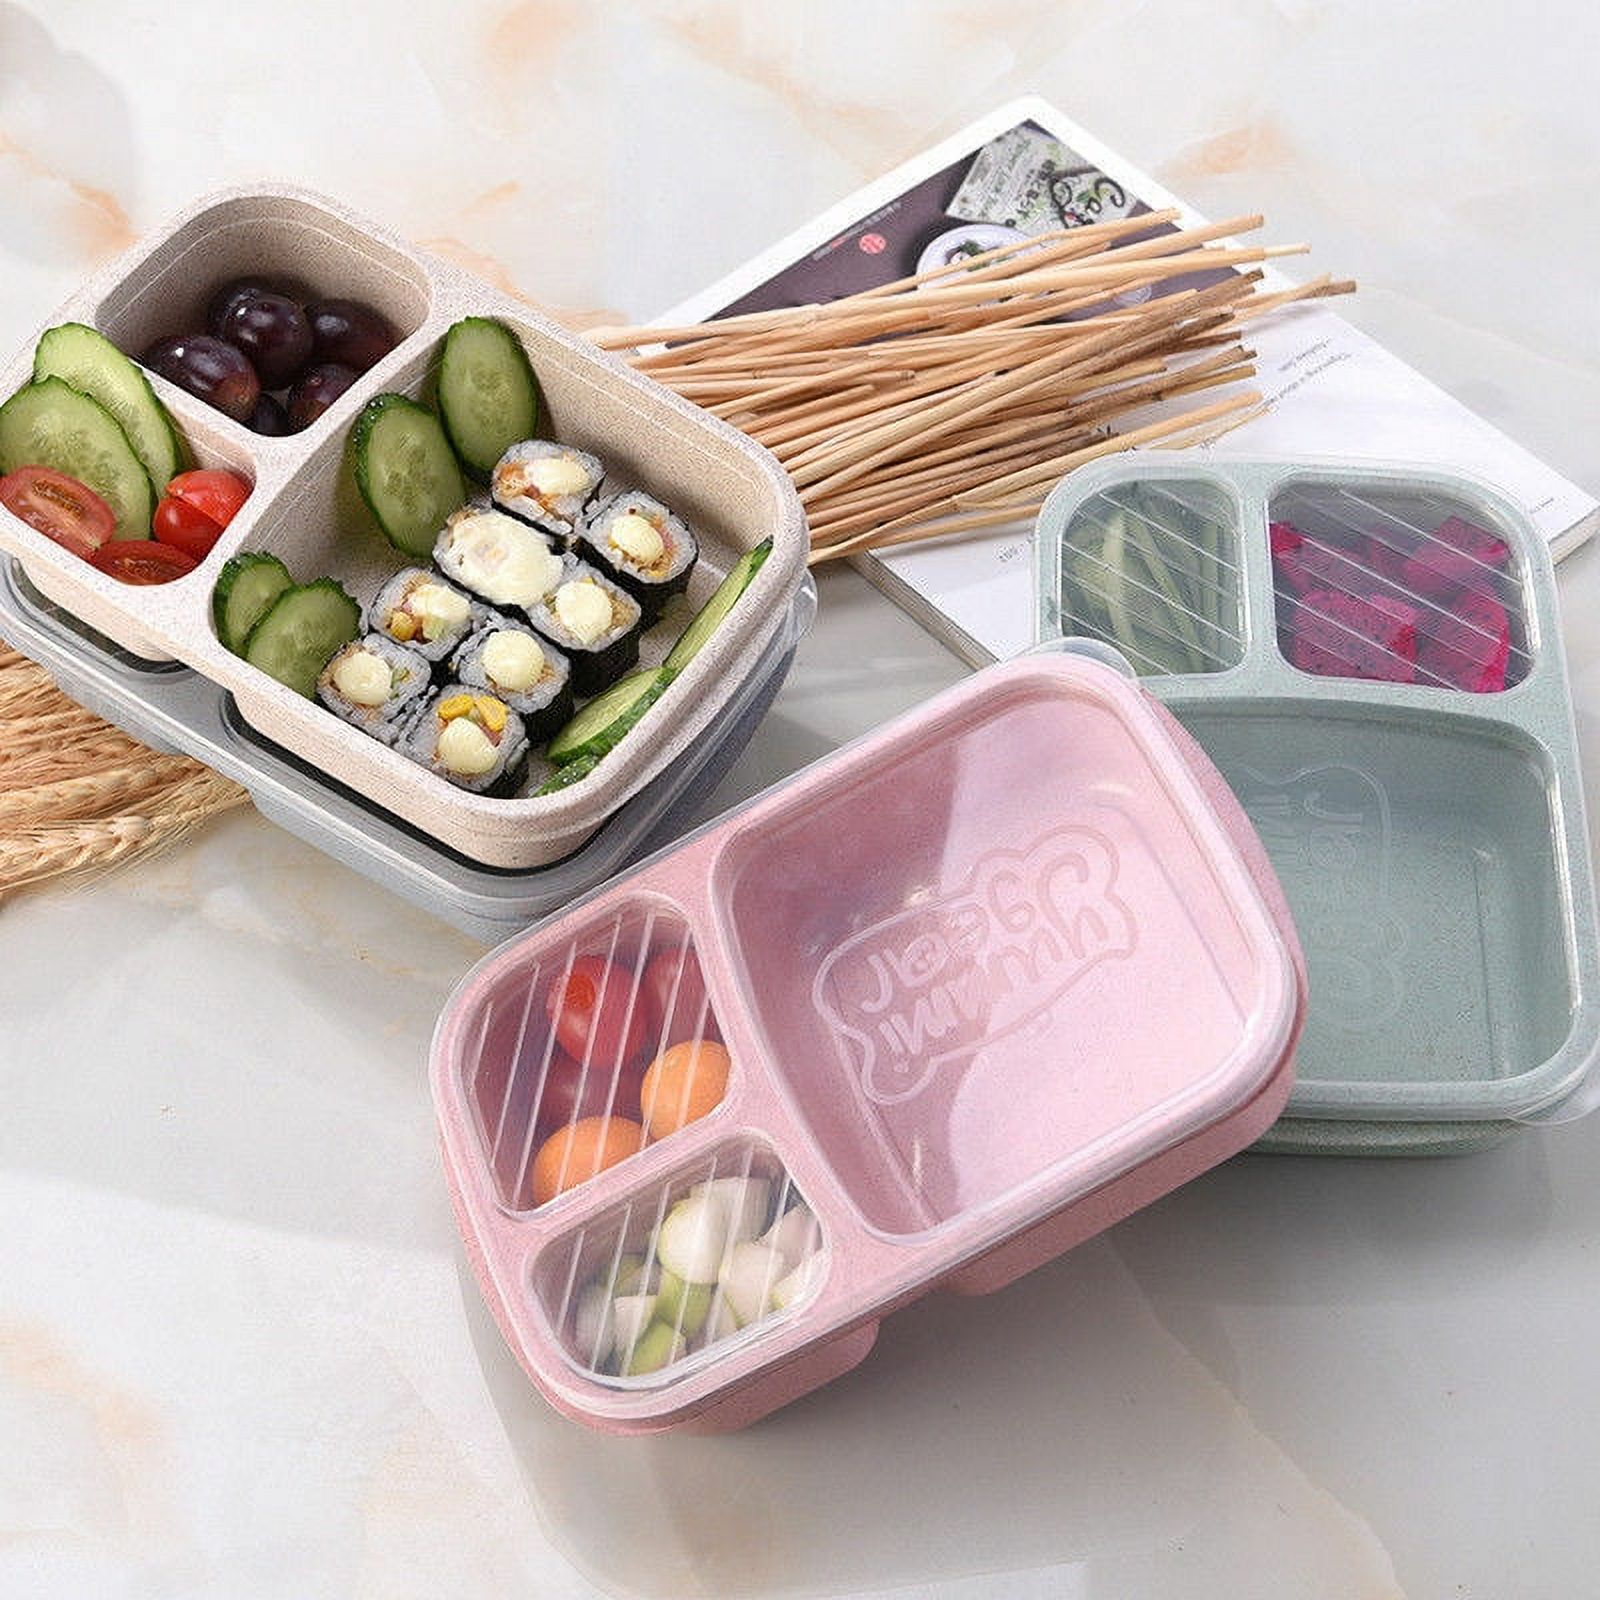 3 Layer Plastic Lunch Box Food Container Bento Lunch Boxes With 3-Compartment Microwave Picnic Food Container Storage Box - image 3 of 5